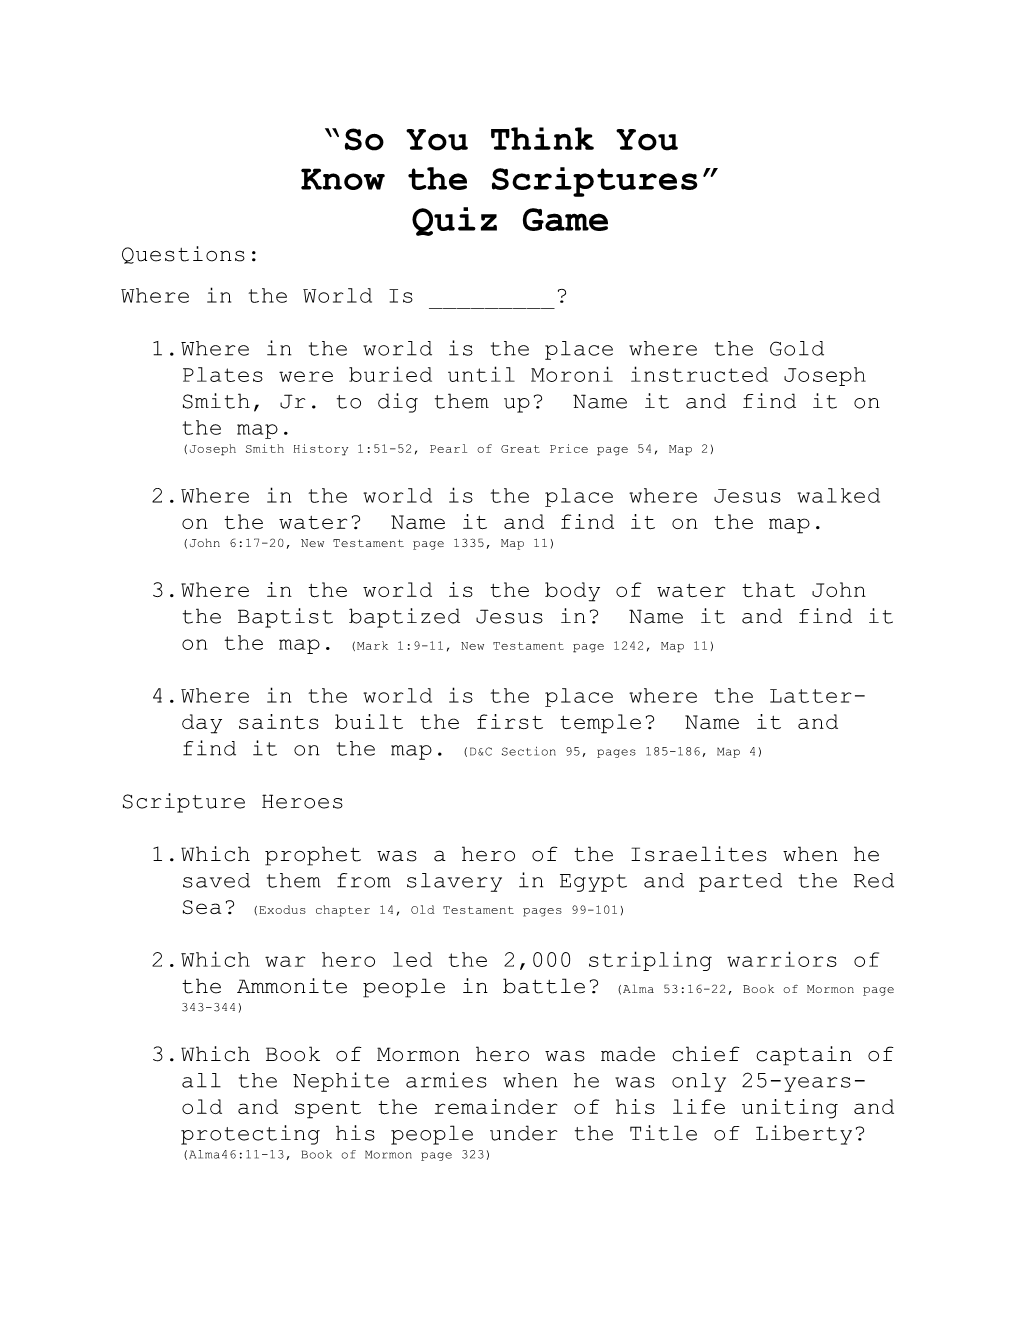 So You Think You Know the Scriptures